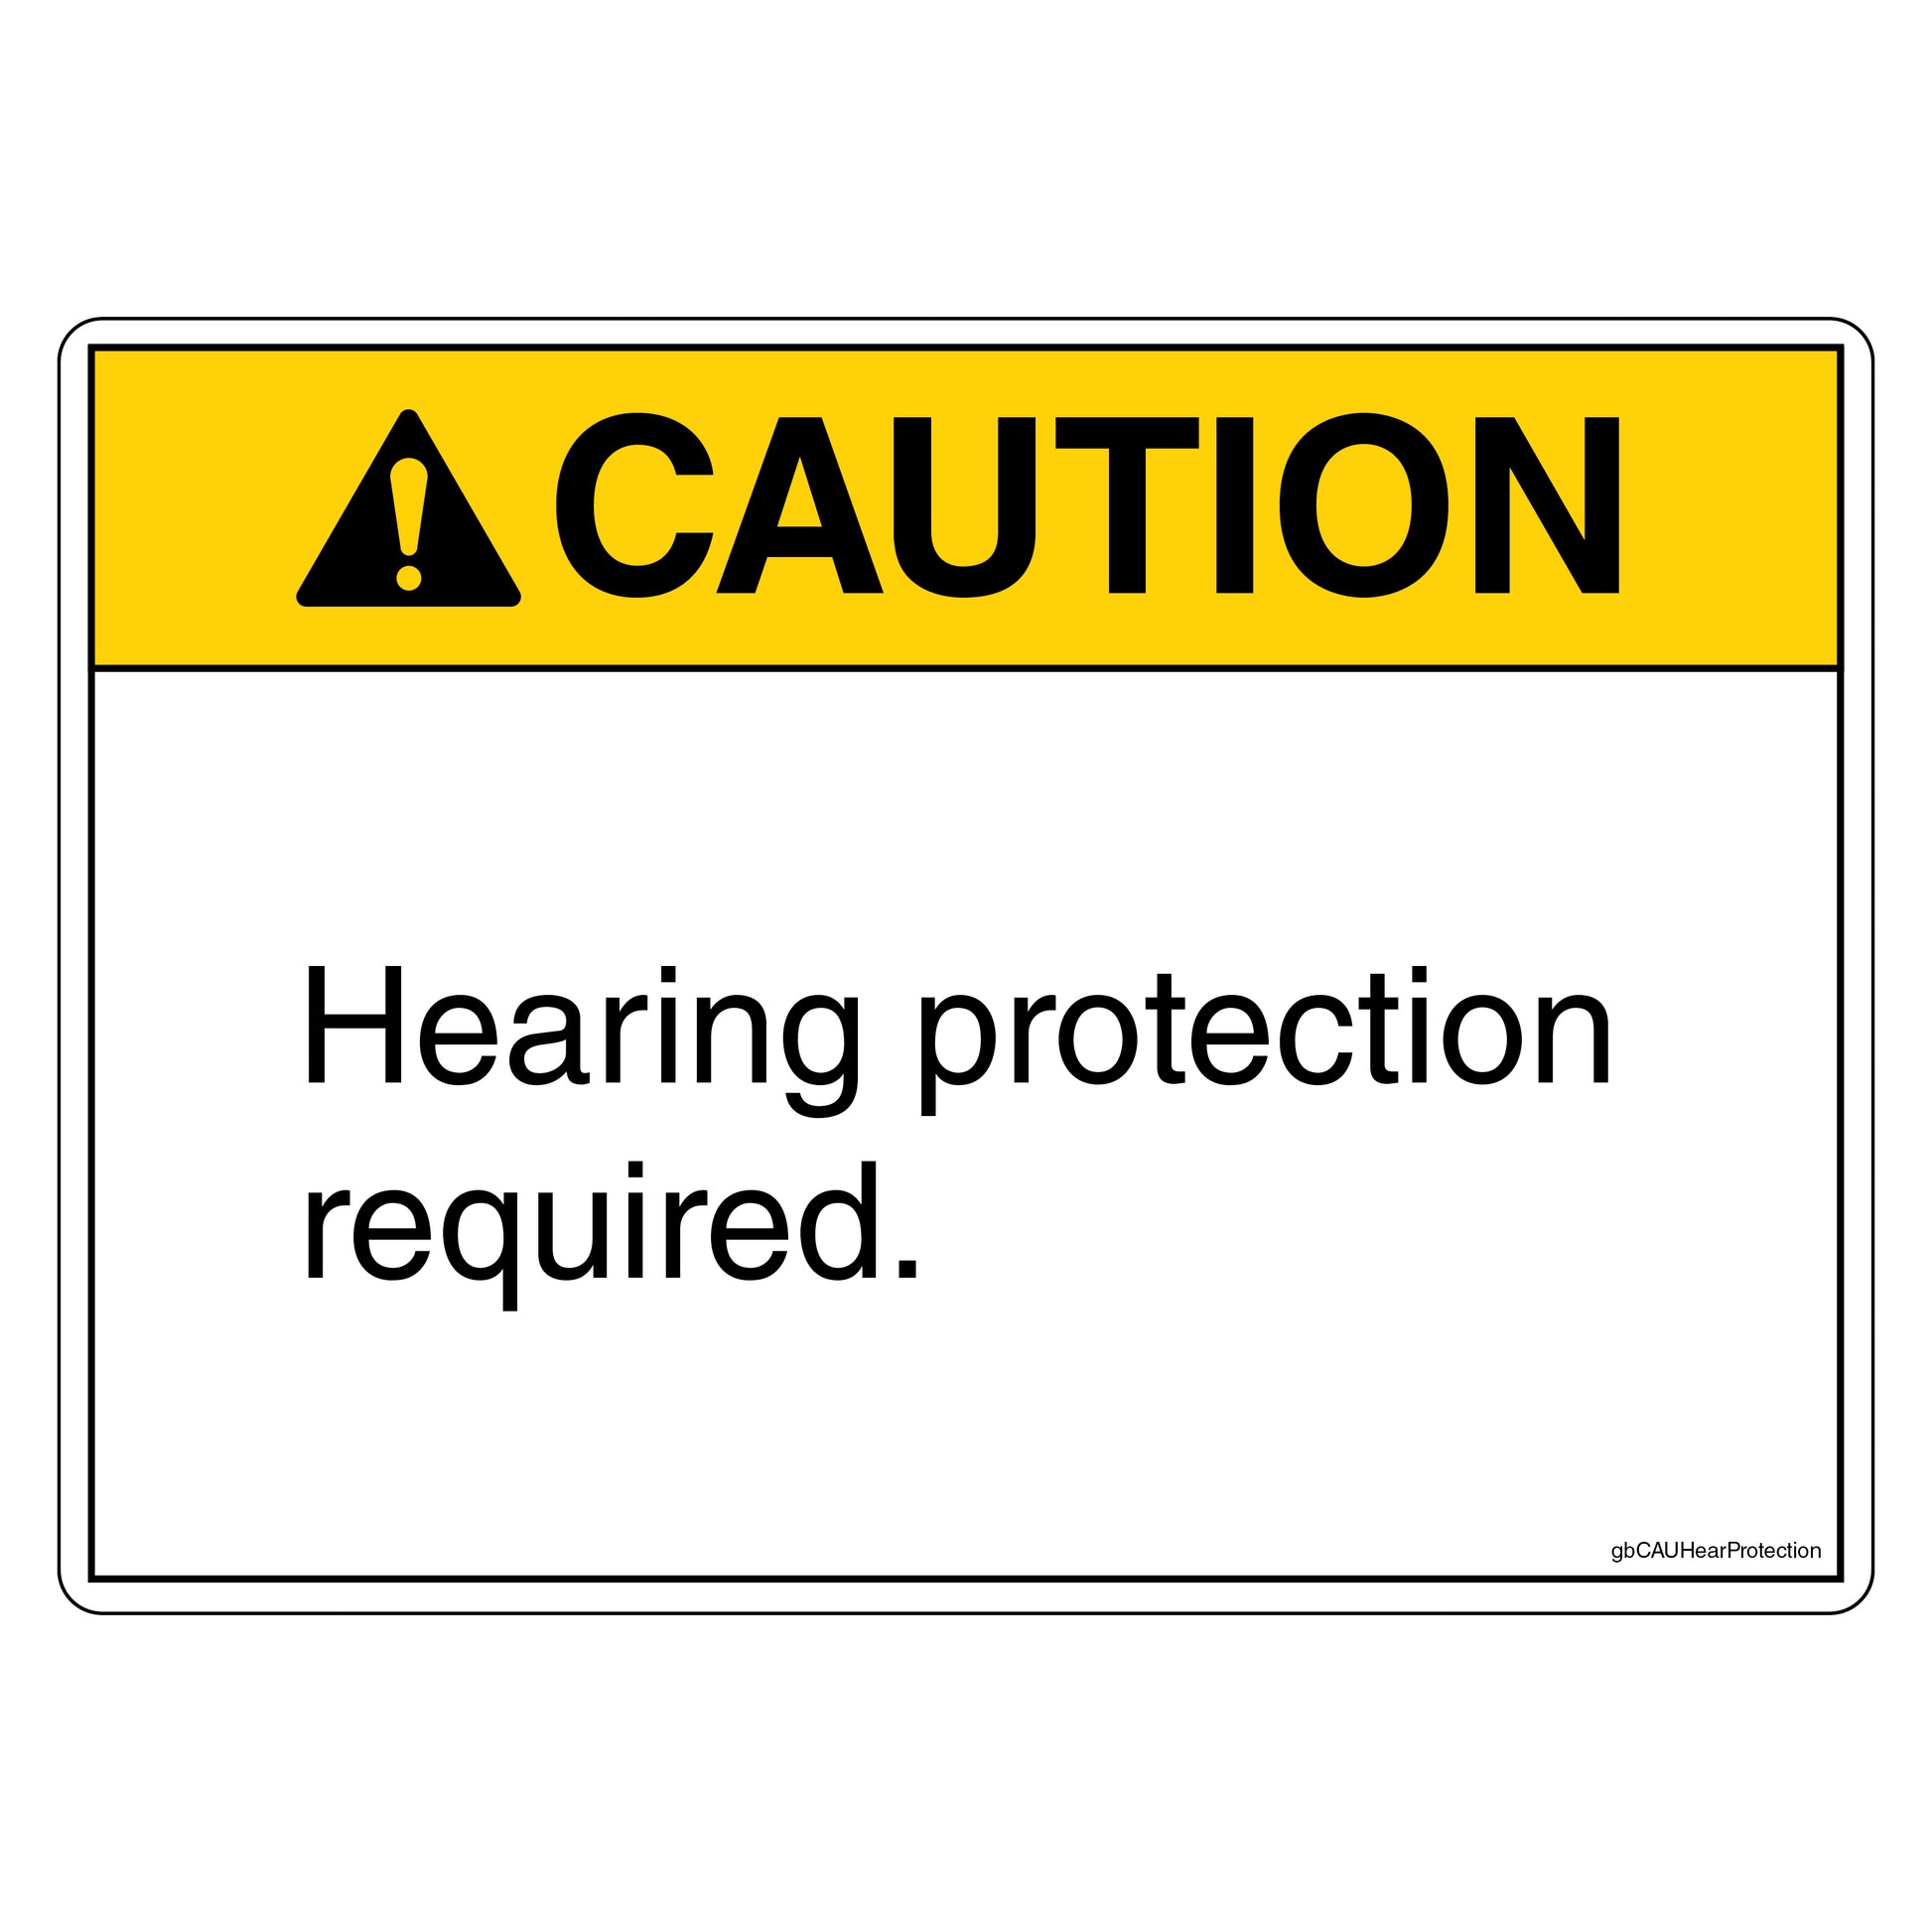 Caution Hearing Protection Required Decal.